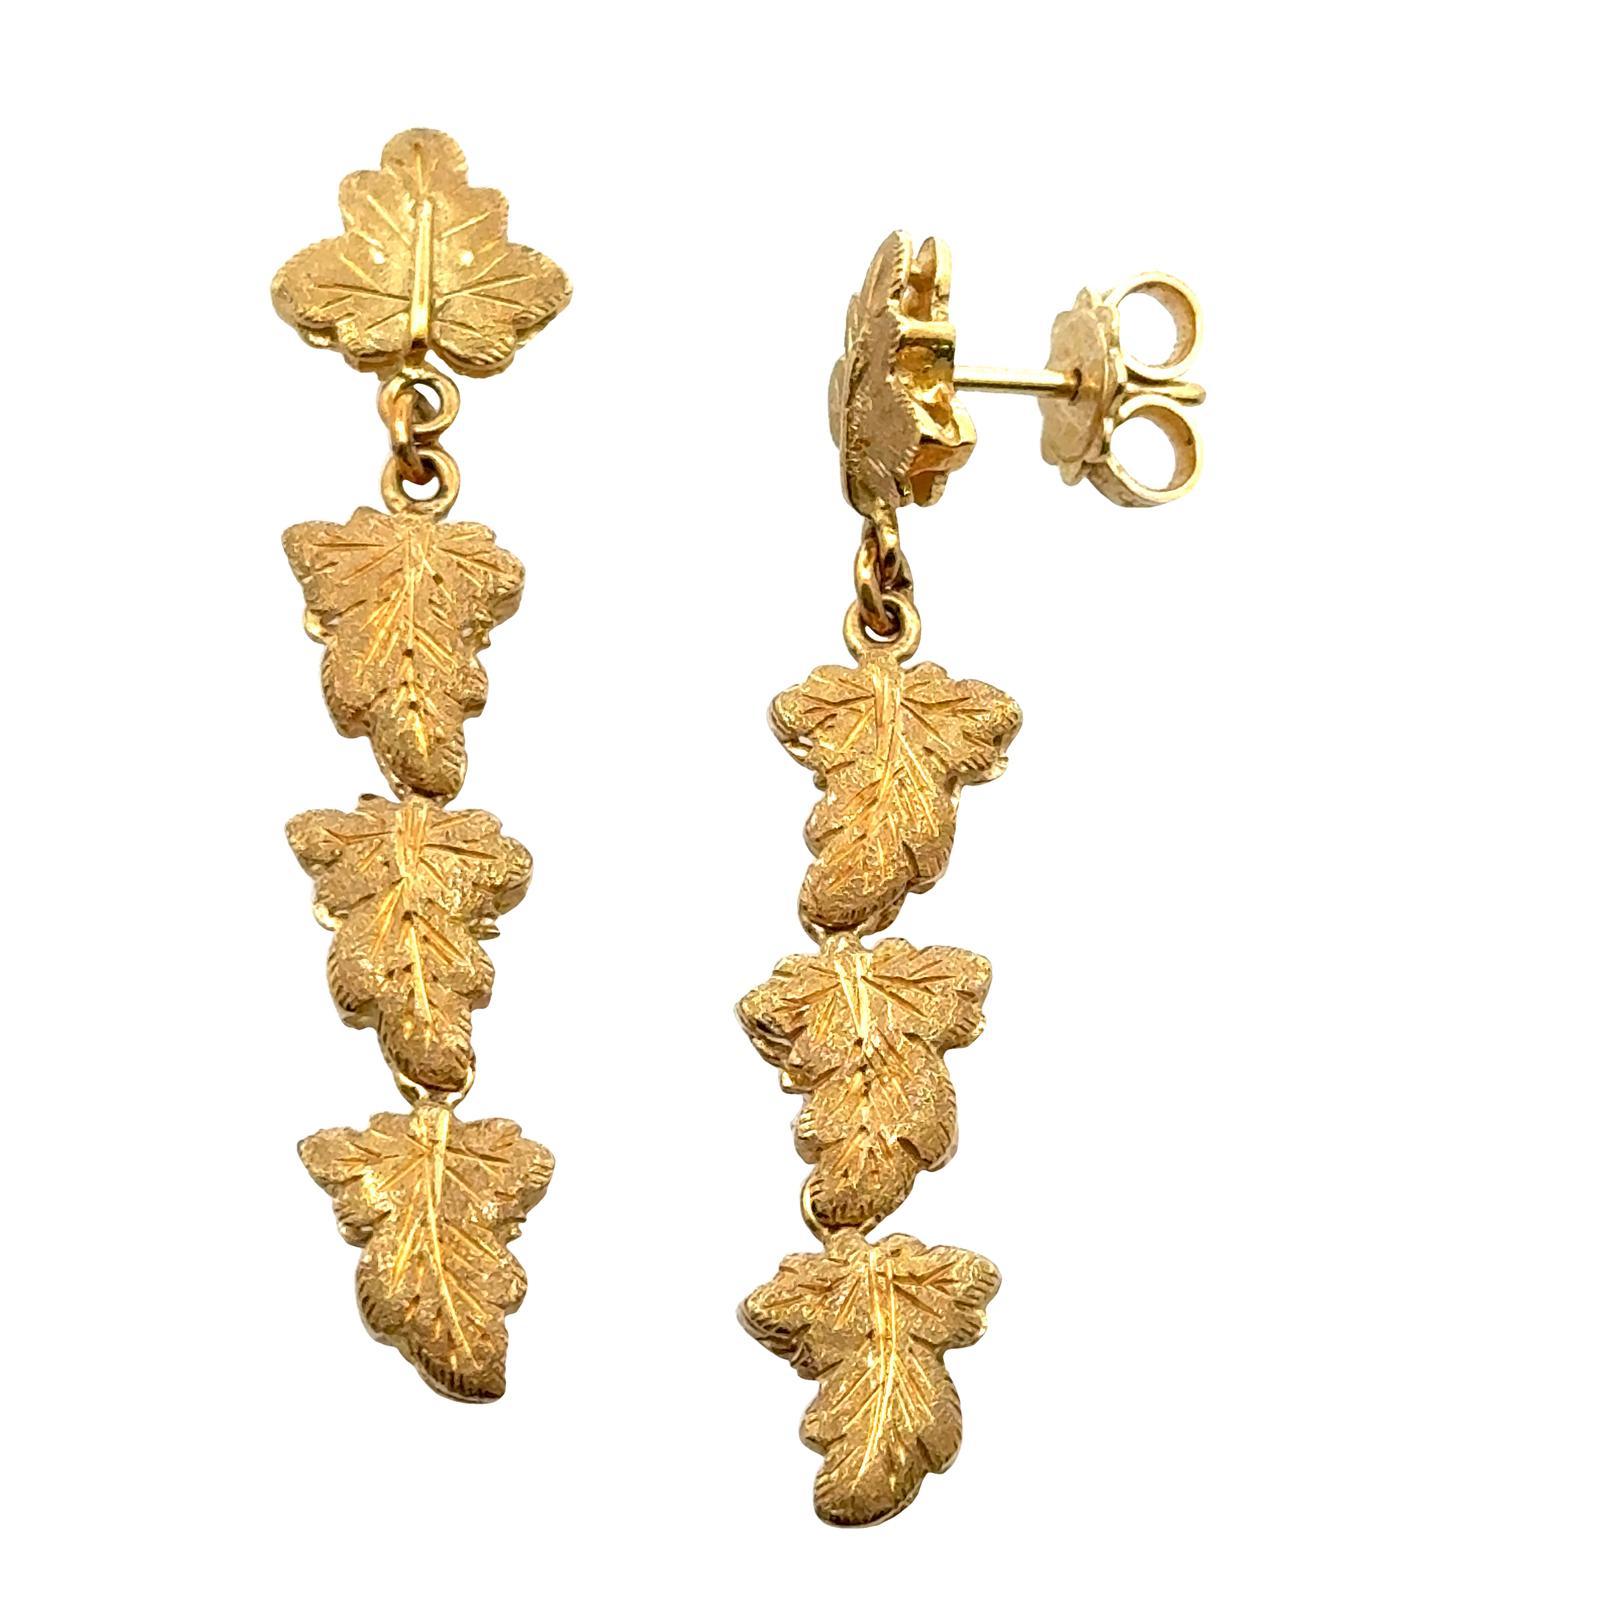 Italian 18 Karat Yellow Gold Leaf Dangle Earrings Signed Fabbrini  In Excellent Condition For Sale In Boca Raton, FL